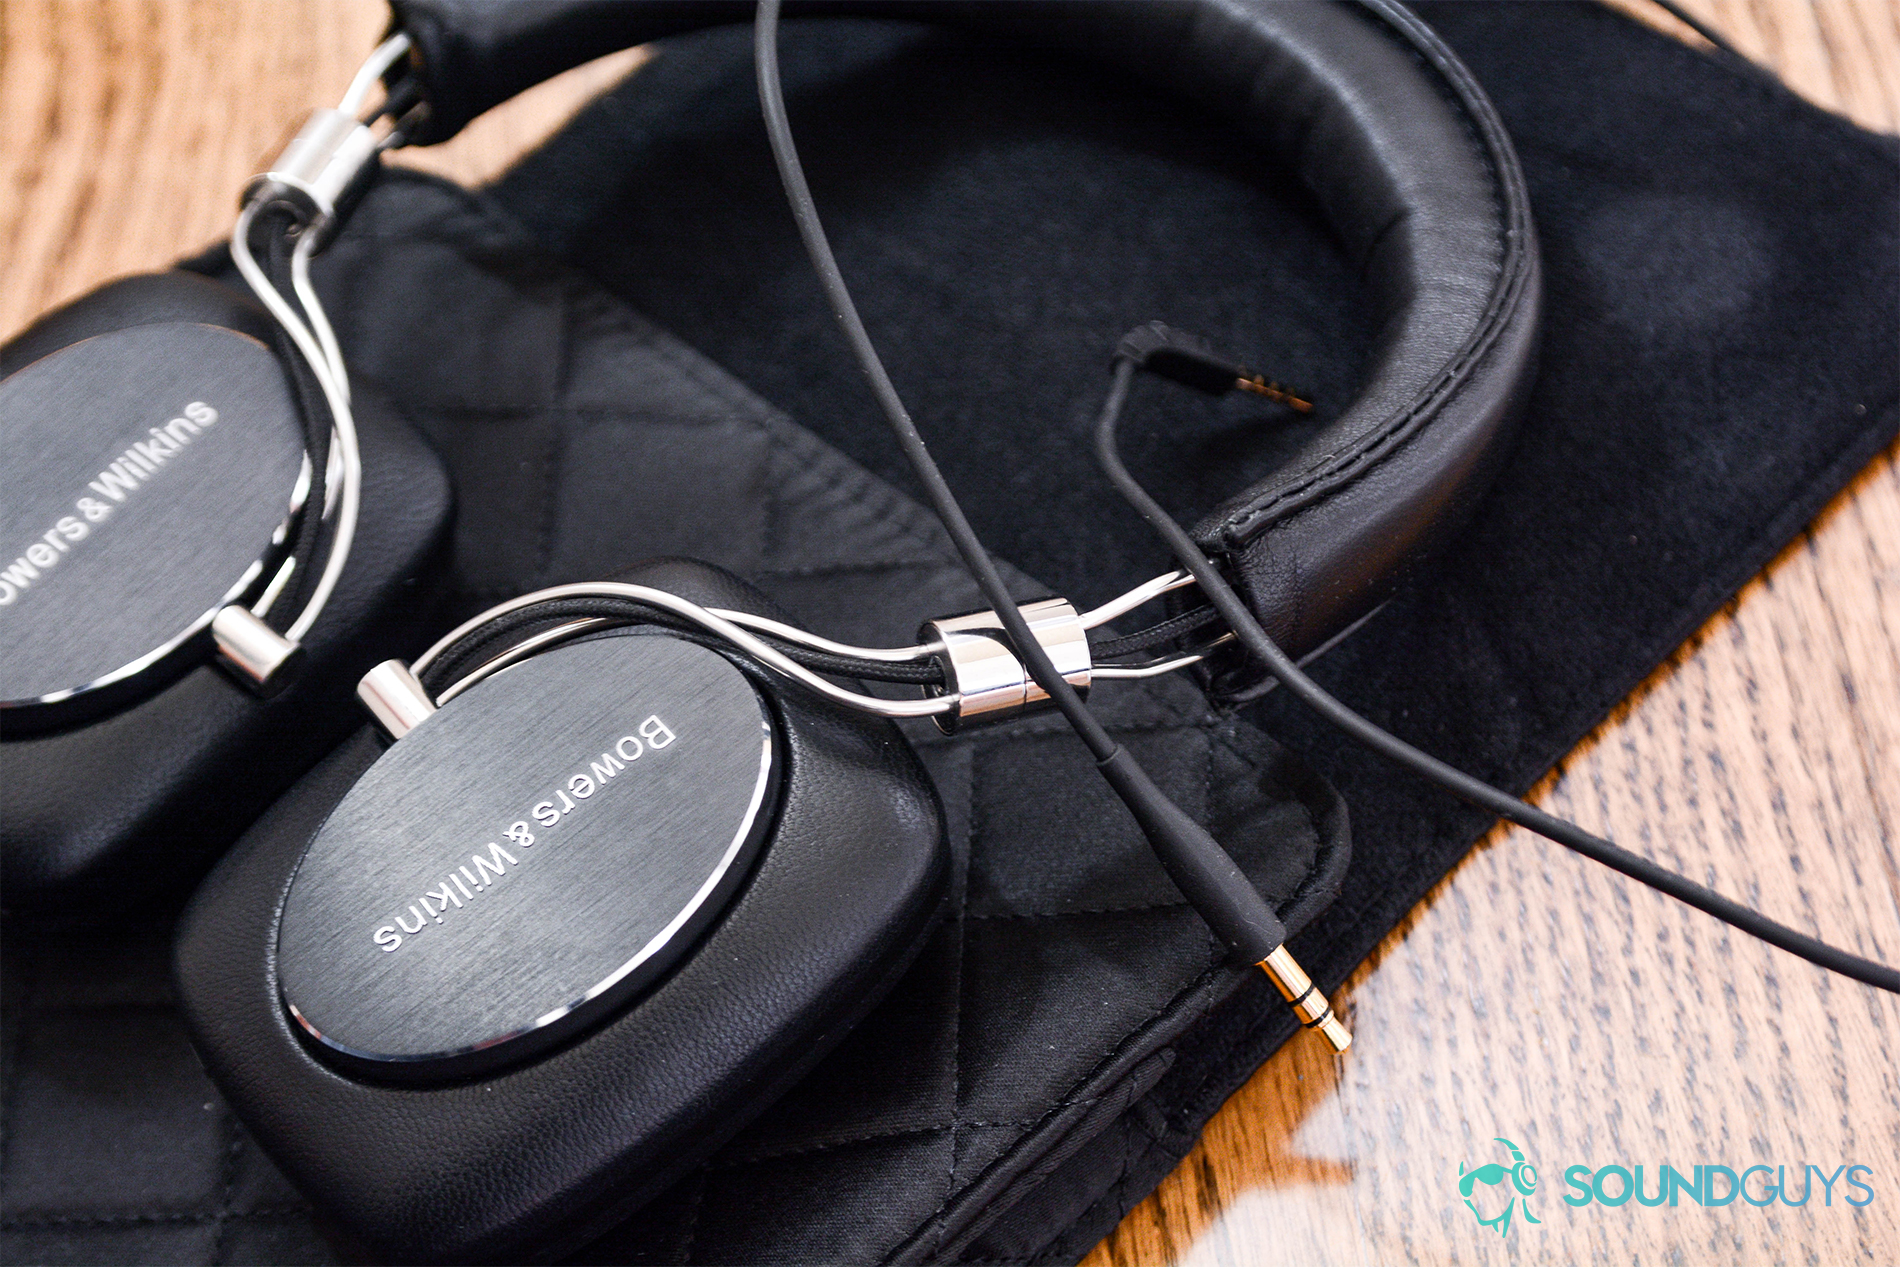 Bowers and Wilkins P5 Wireless: The headphones on the quilted carrying case with the proprietary cable.